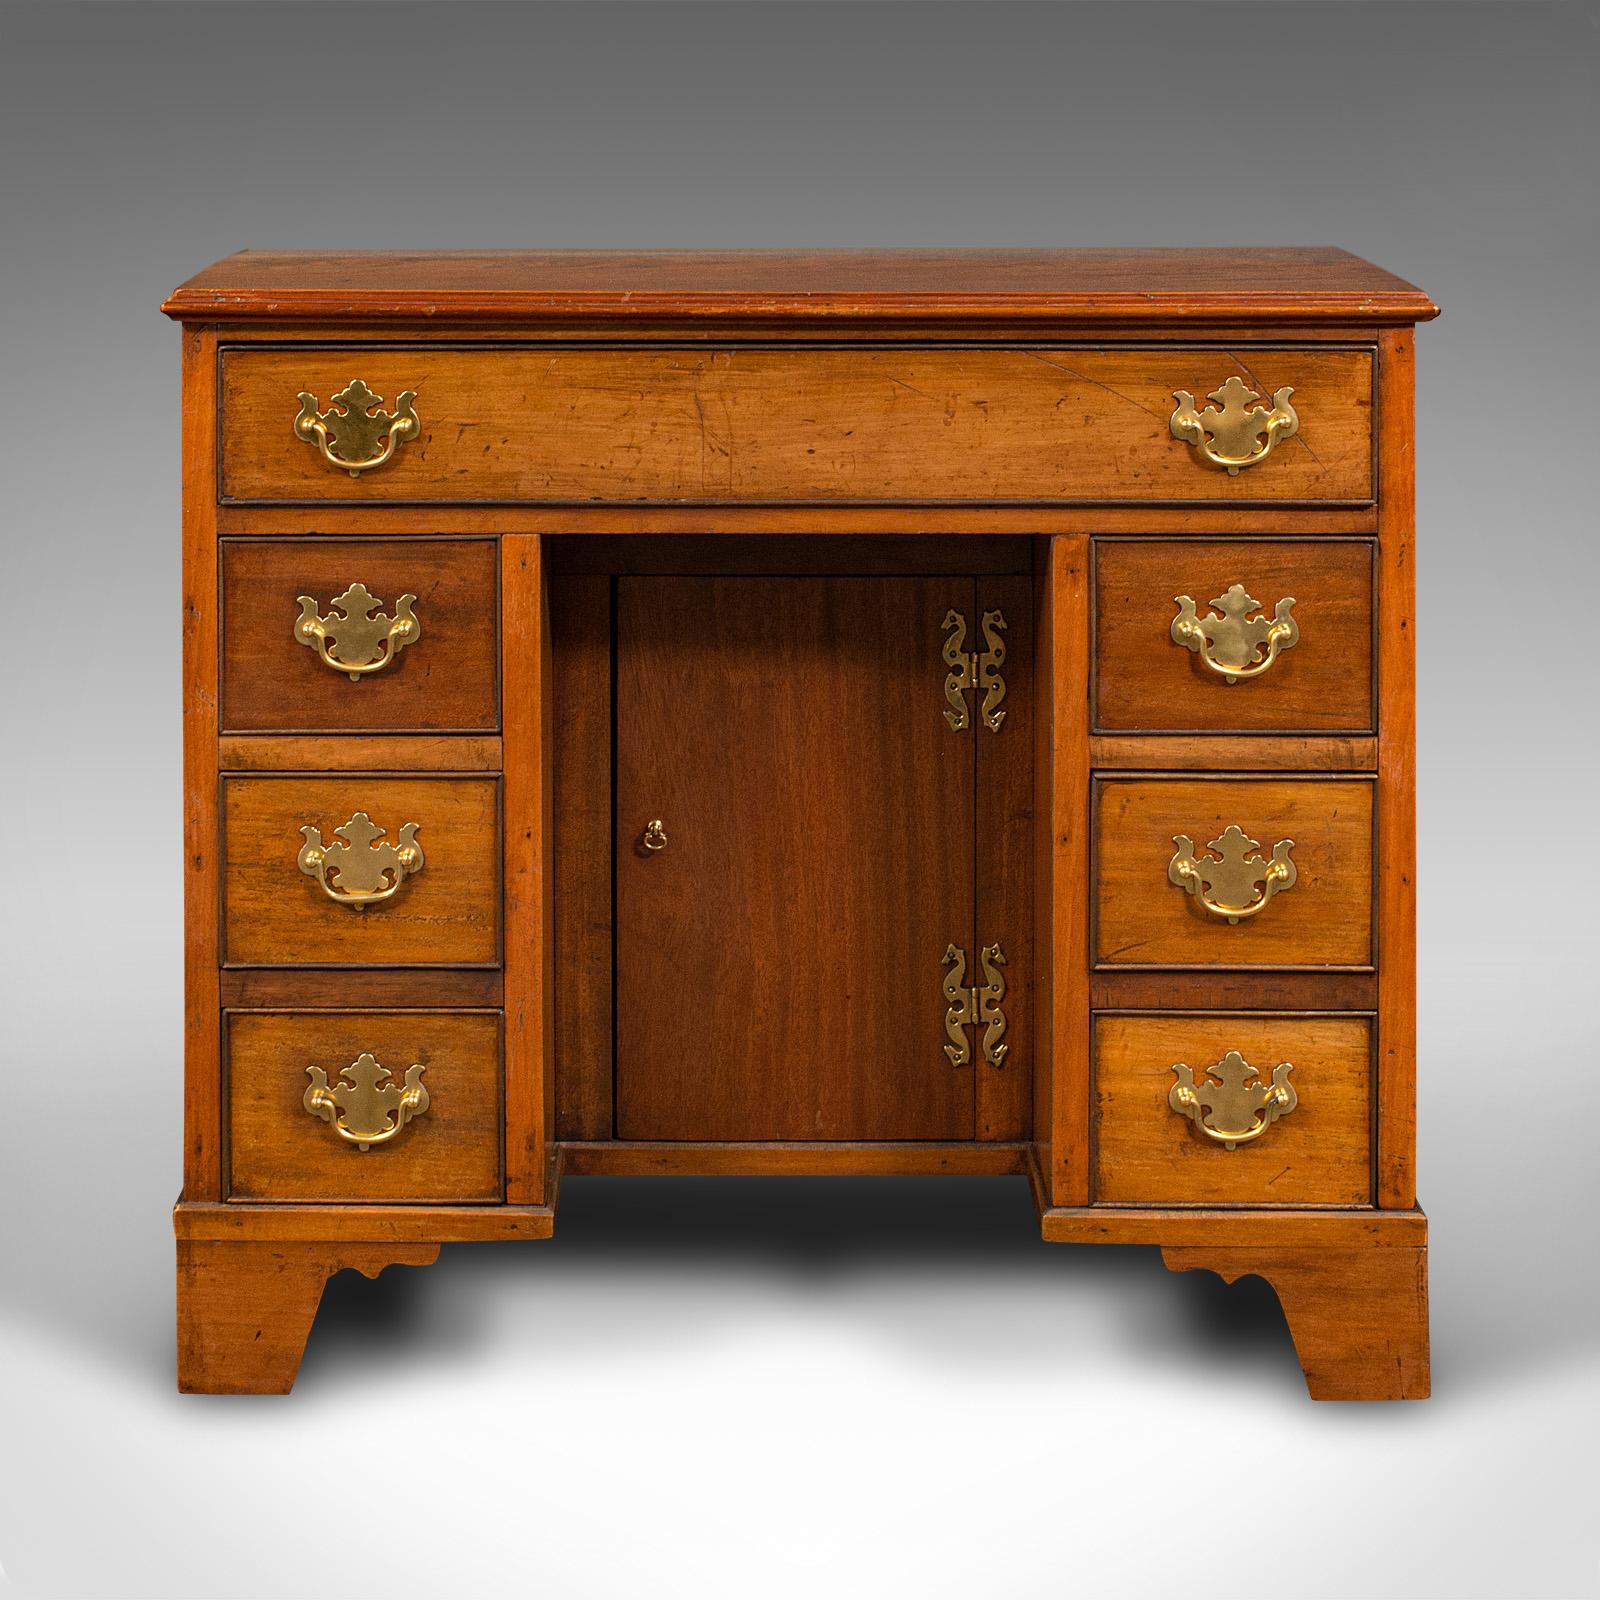 This is a small antique kneehole desk. An English, mahogany writing table with Georgian revival taste, dating to the Edwardian period, circa 1910.

Delightfully petite decorative desk, ideal for the vestibule.
Displaying a desirable aged patina